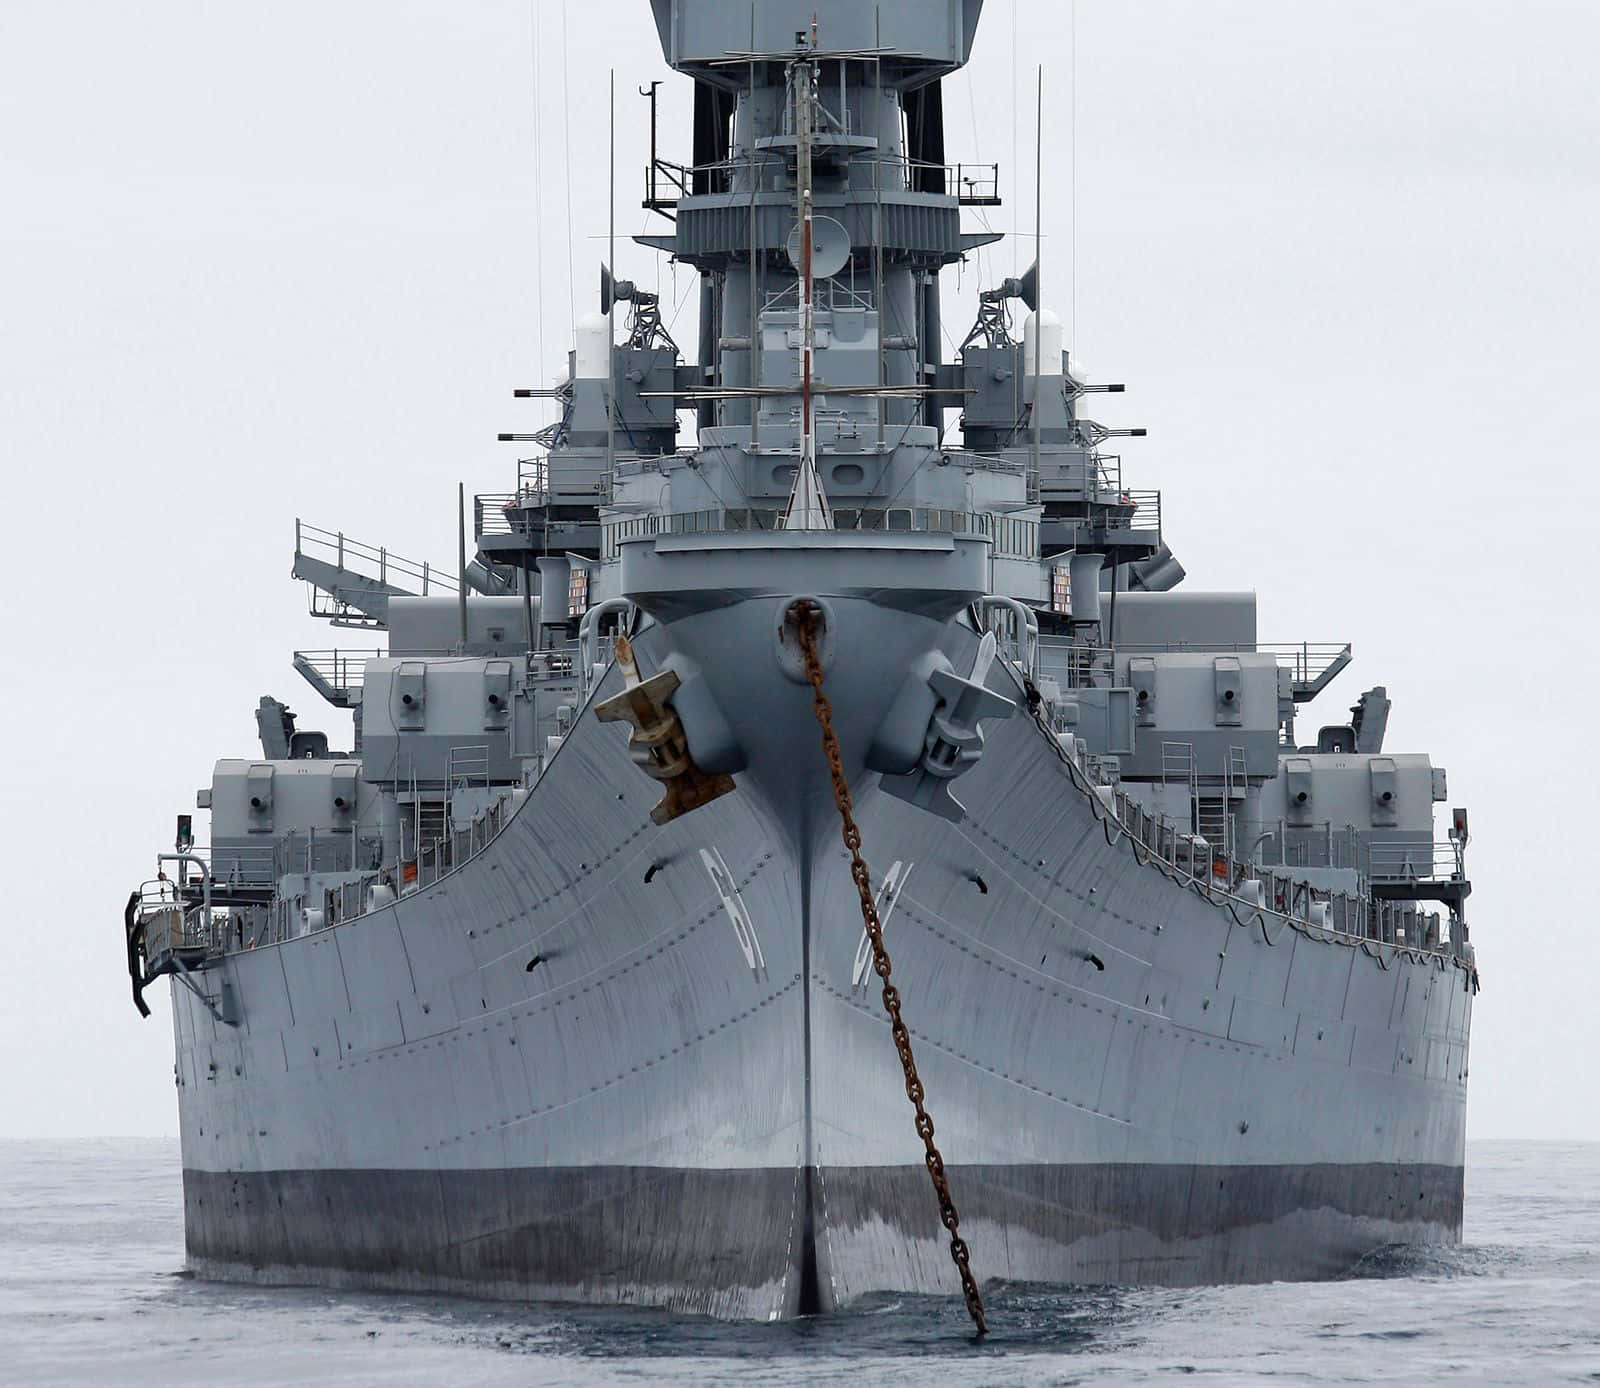 A Large Battleship Is Floating In The Water